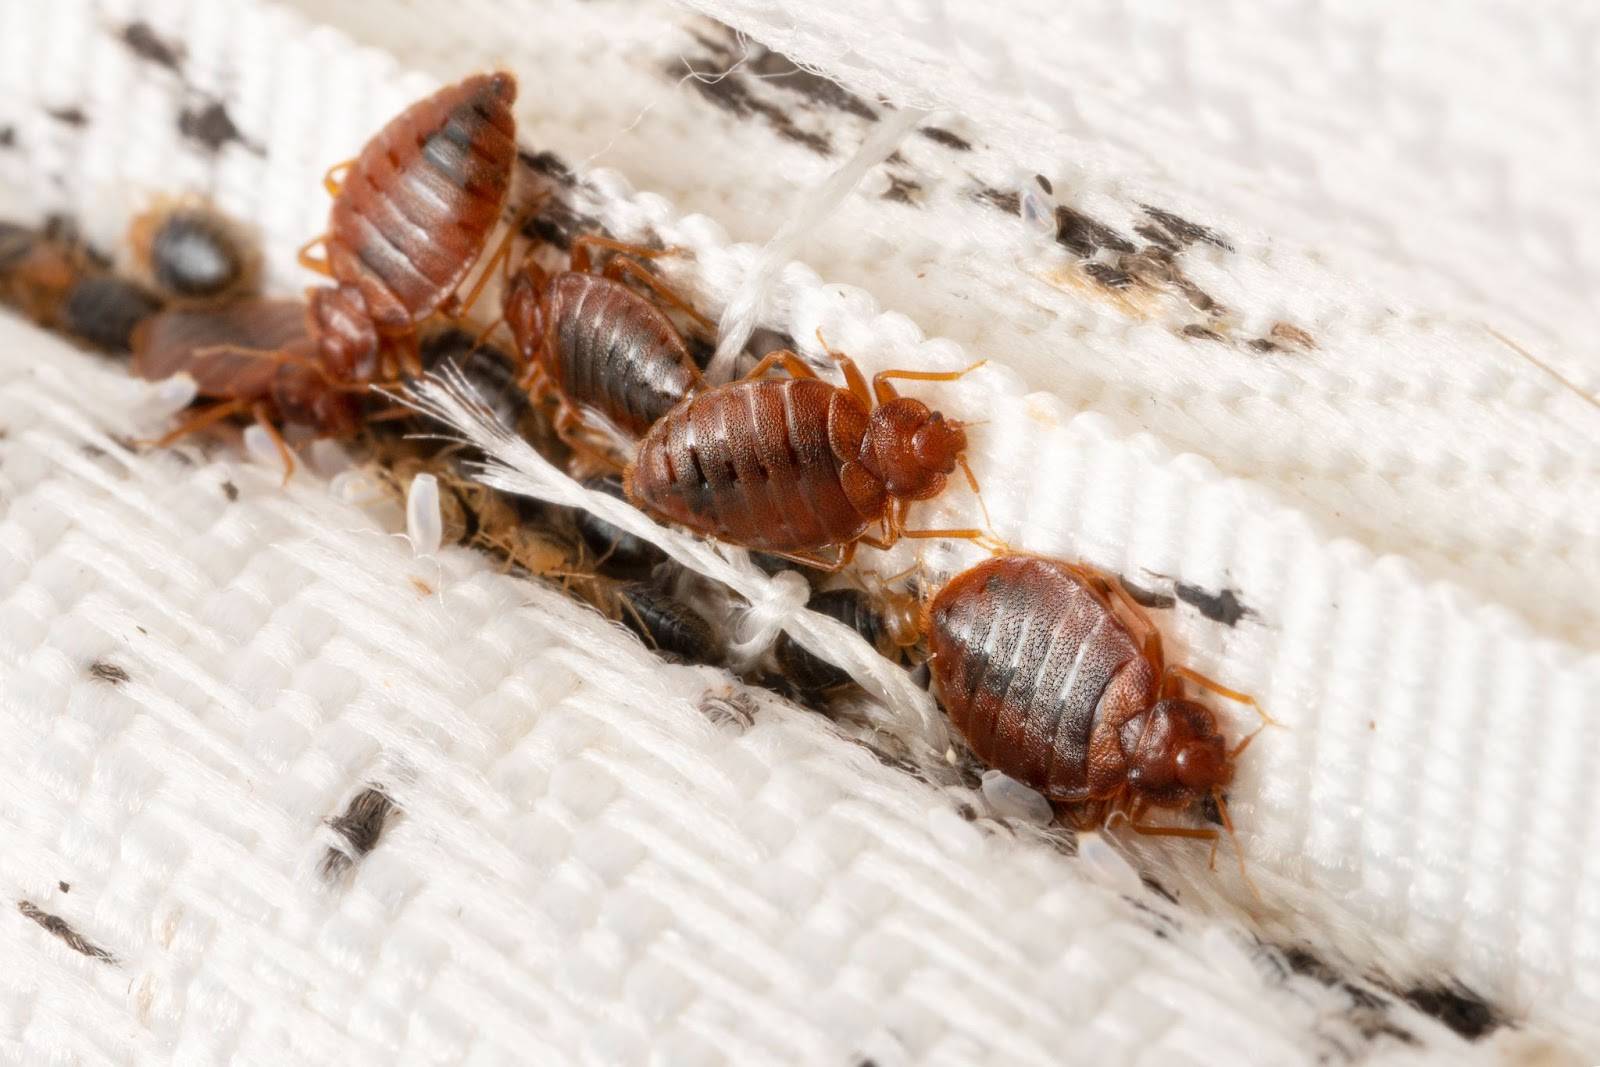 Several brown bed bugs crawl around a ripped seam in a mattress